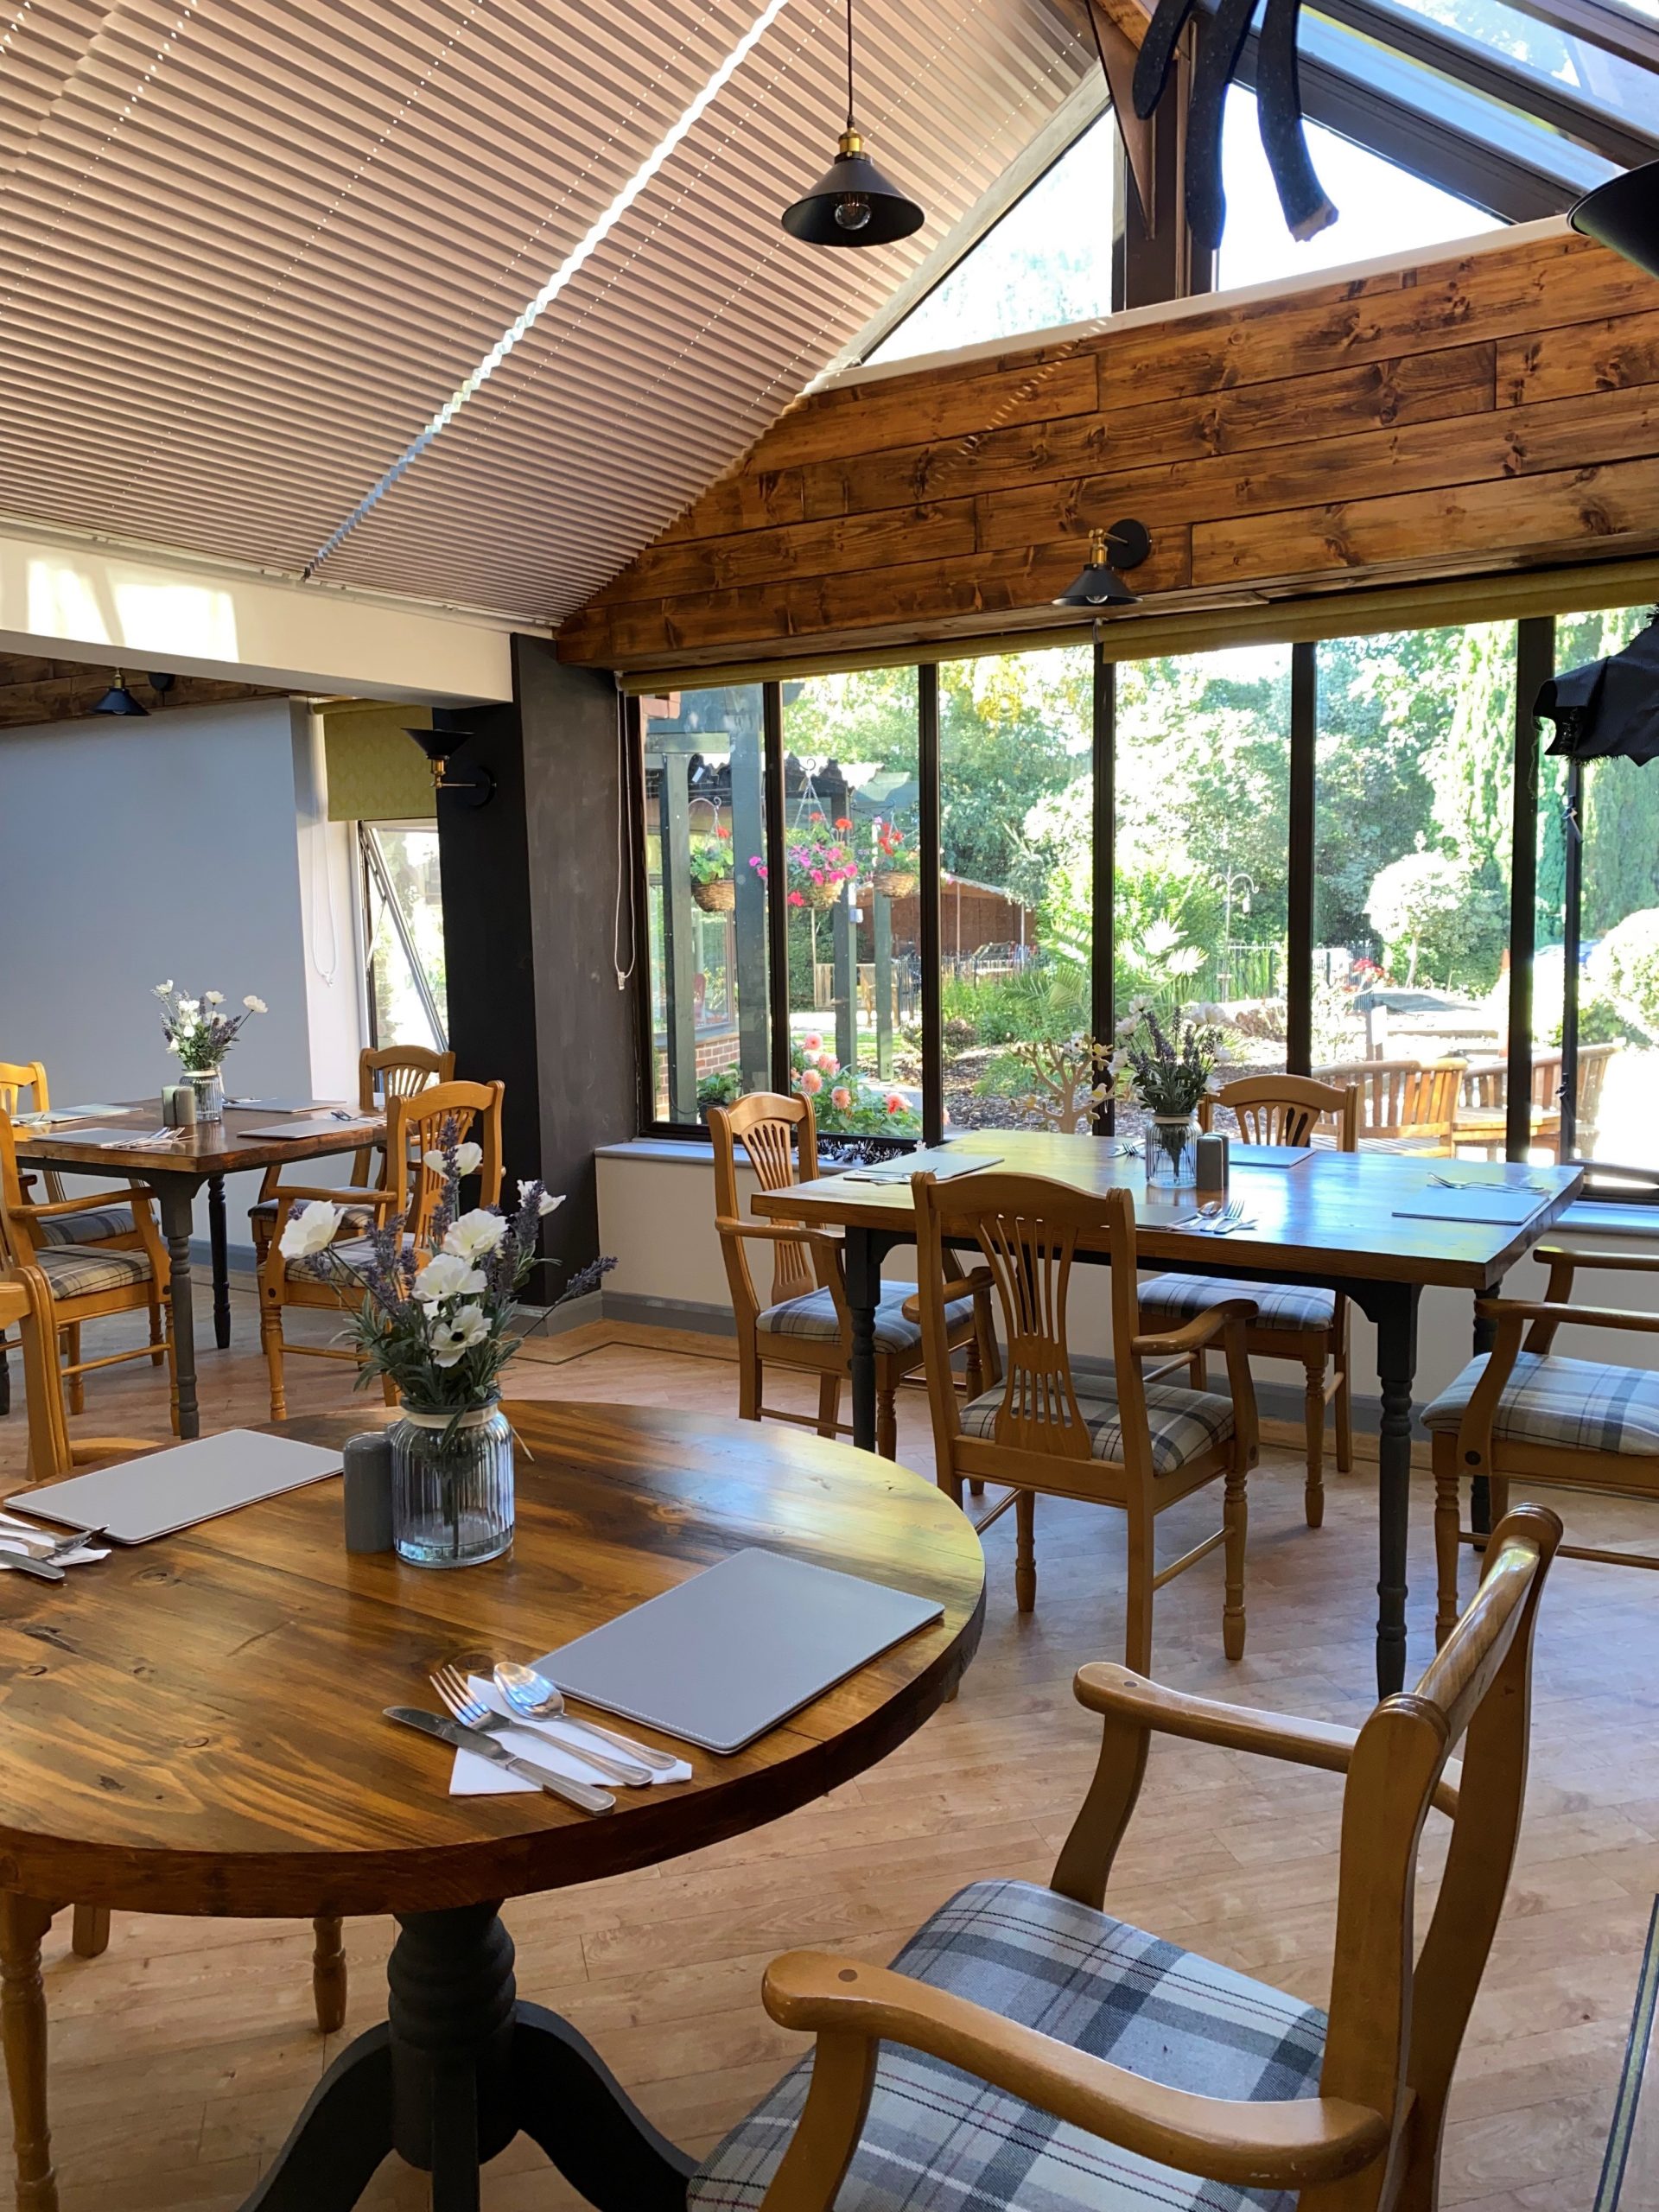 Dining room in care home with wooden tables and views to the garden